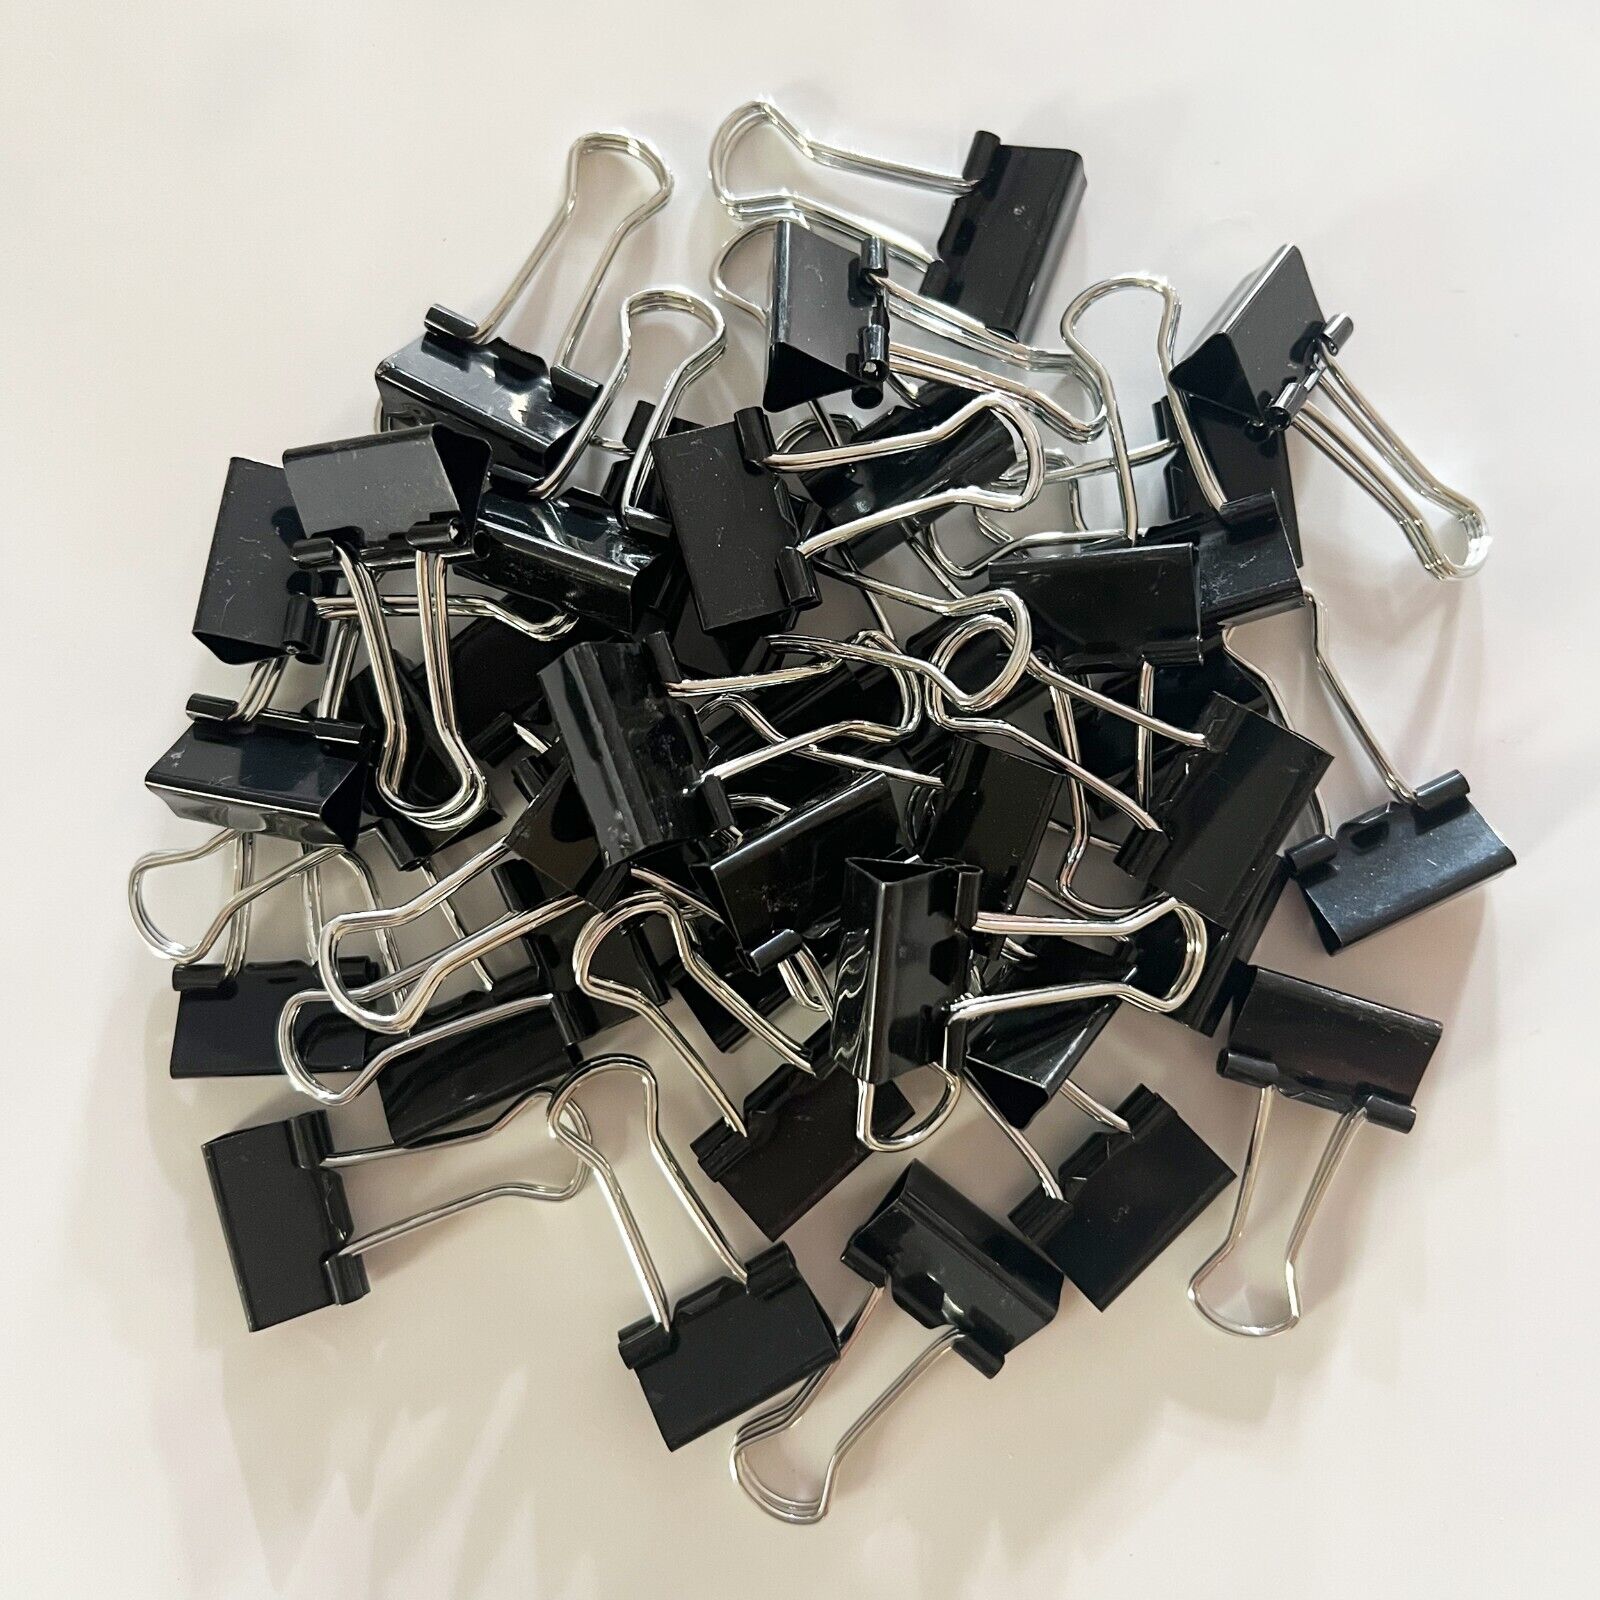 Small Binder Clips, Black Color, Horizontal width 3/4IN, Small Metal Paper Clamp